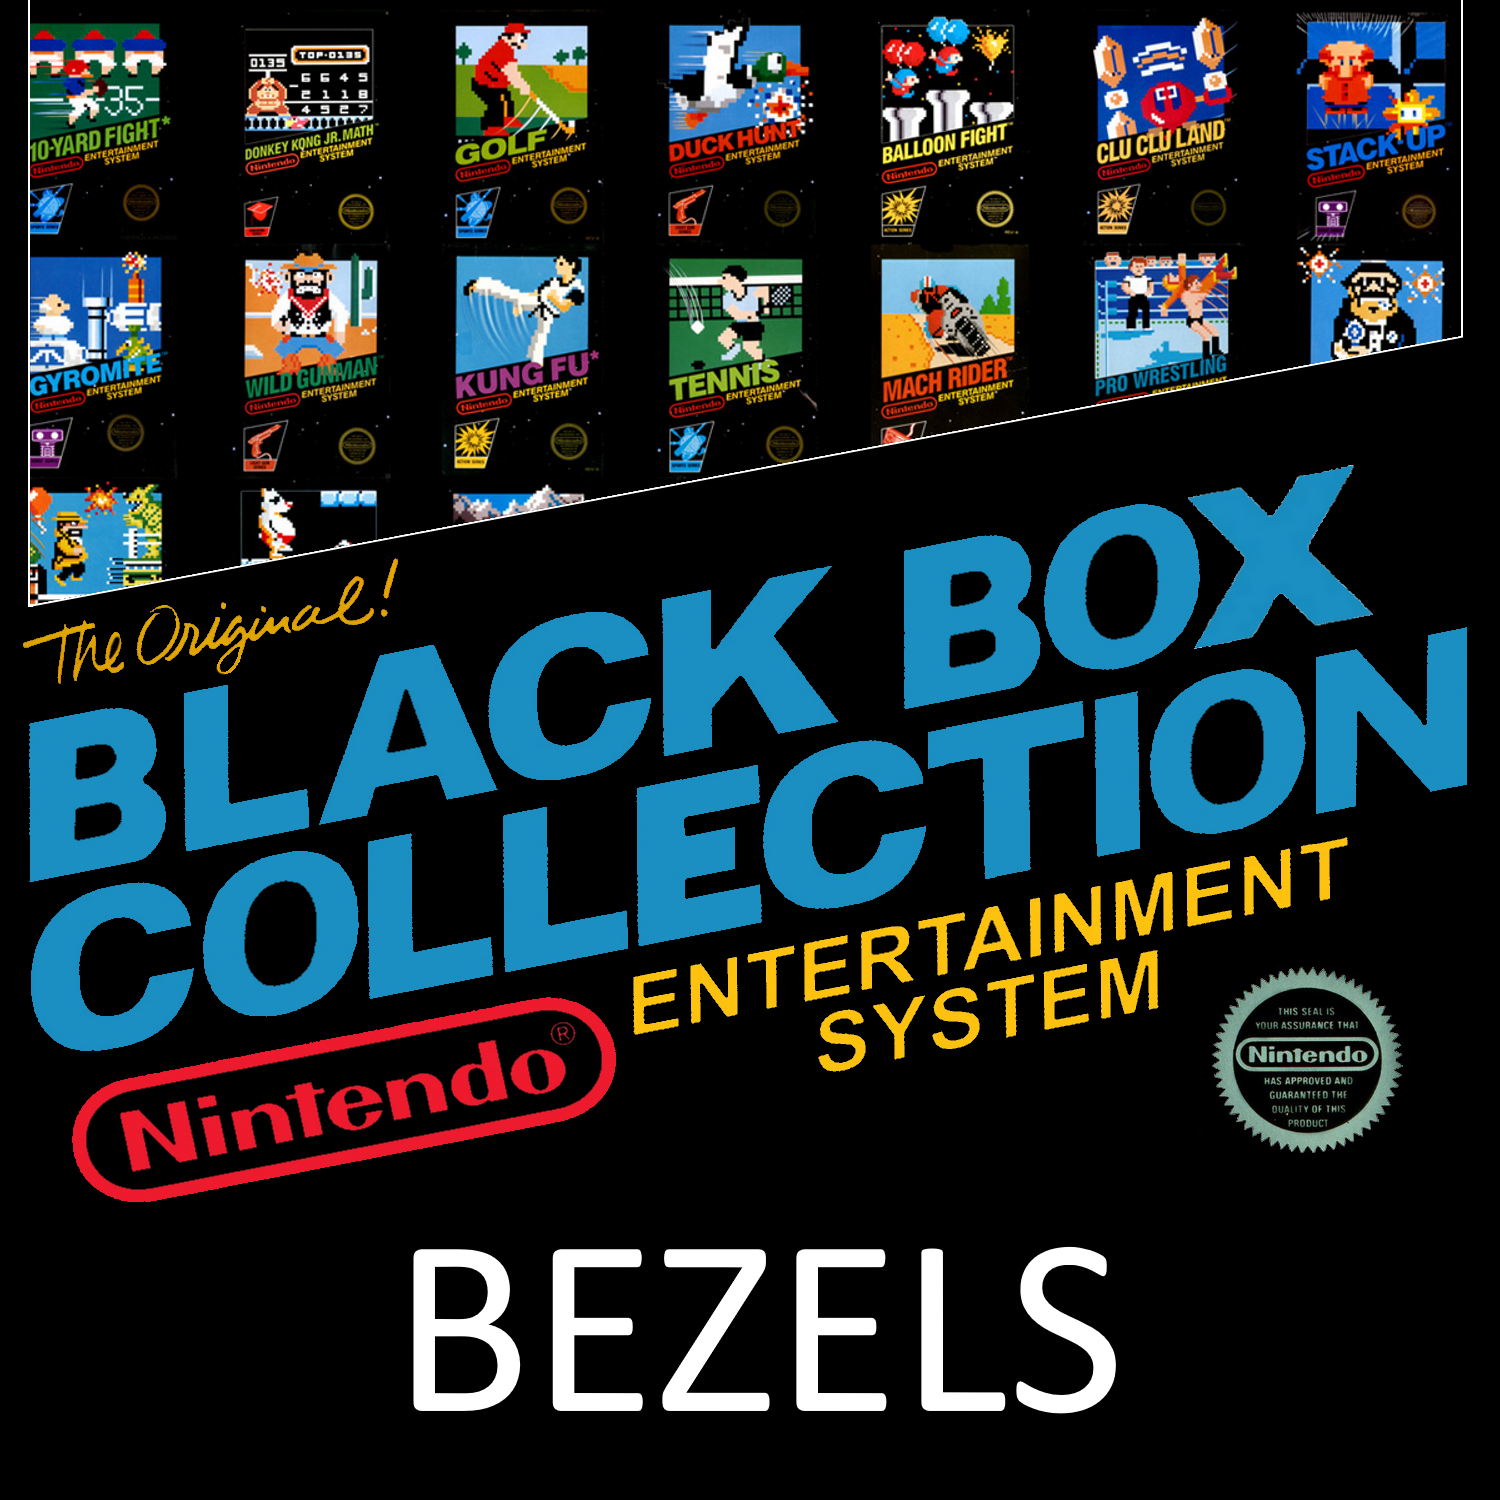 More information about "NES Black Box Games Bezels and Configs for Retroarch"